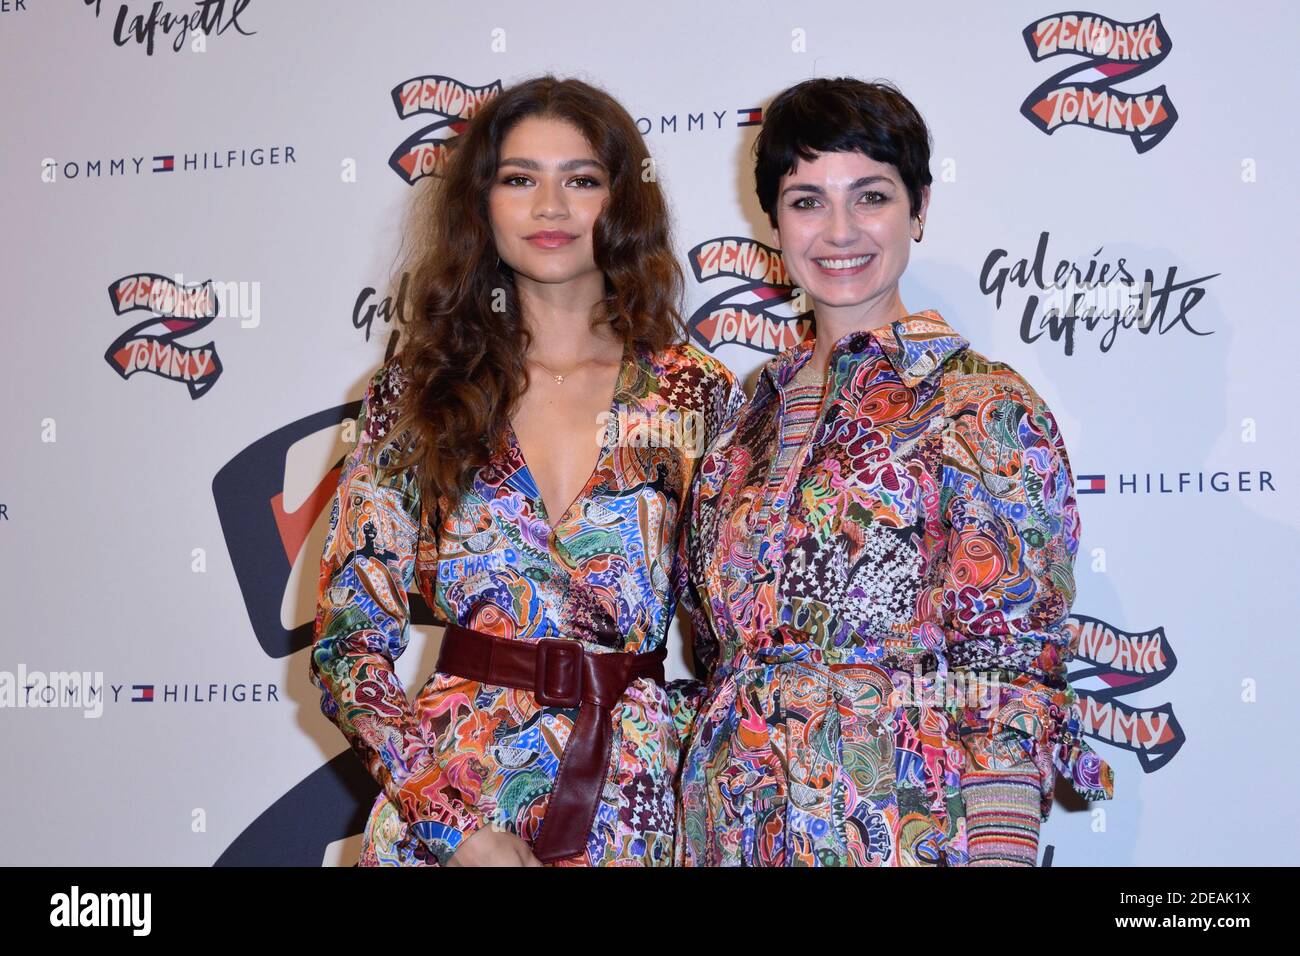 Zendaya and Eva Geraldine Fontanelli attending the Tommy Hilfiger TOMMYNOW  Spring 2019 : TommyXZendaya Photocall as part of the Paris Fashion Week  Womenswear Fall/Winter 2019/2020 at the Galeries Lafayette in Paris, France